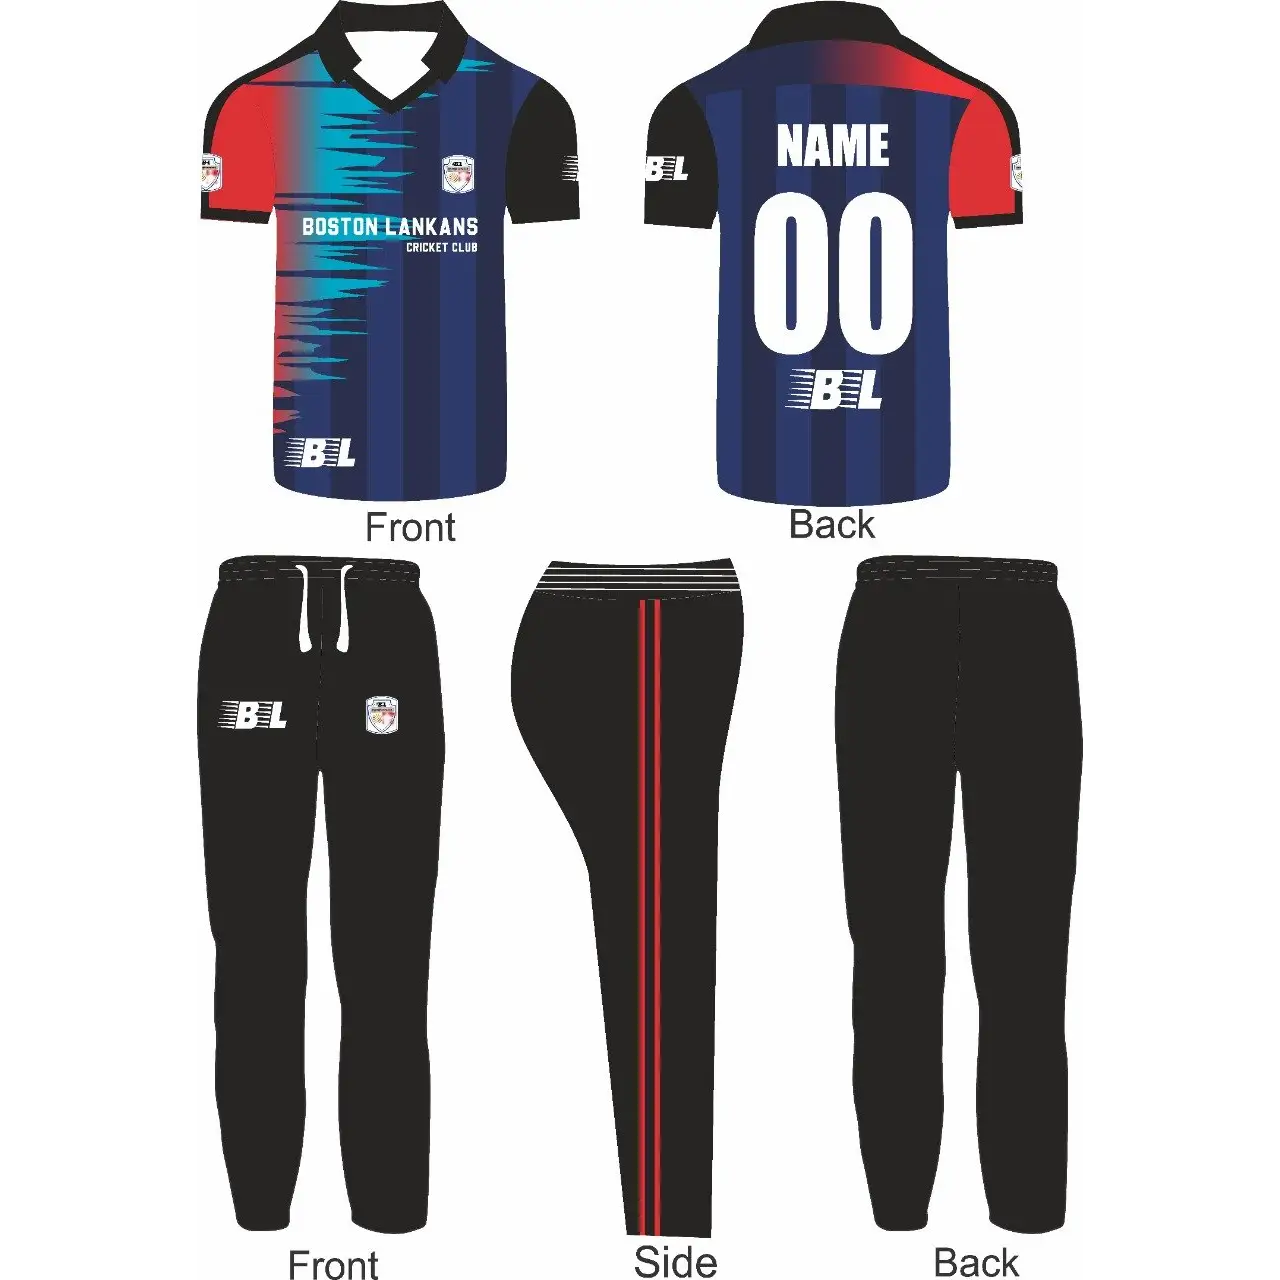 Cricket jersey black with purple and blue